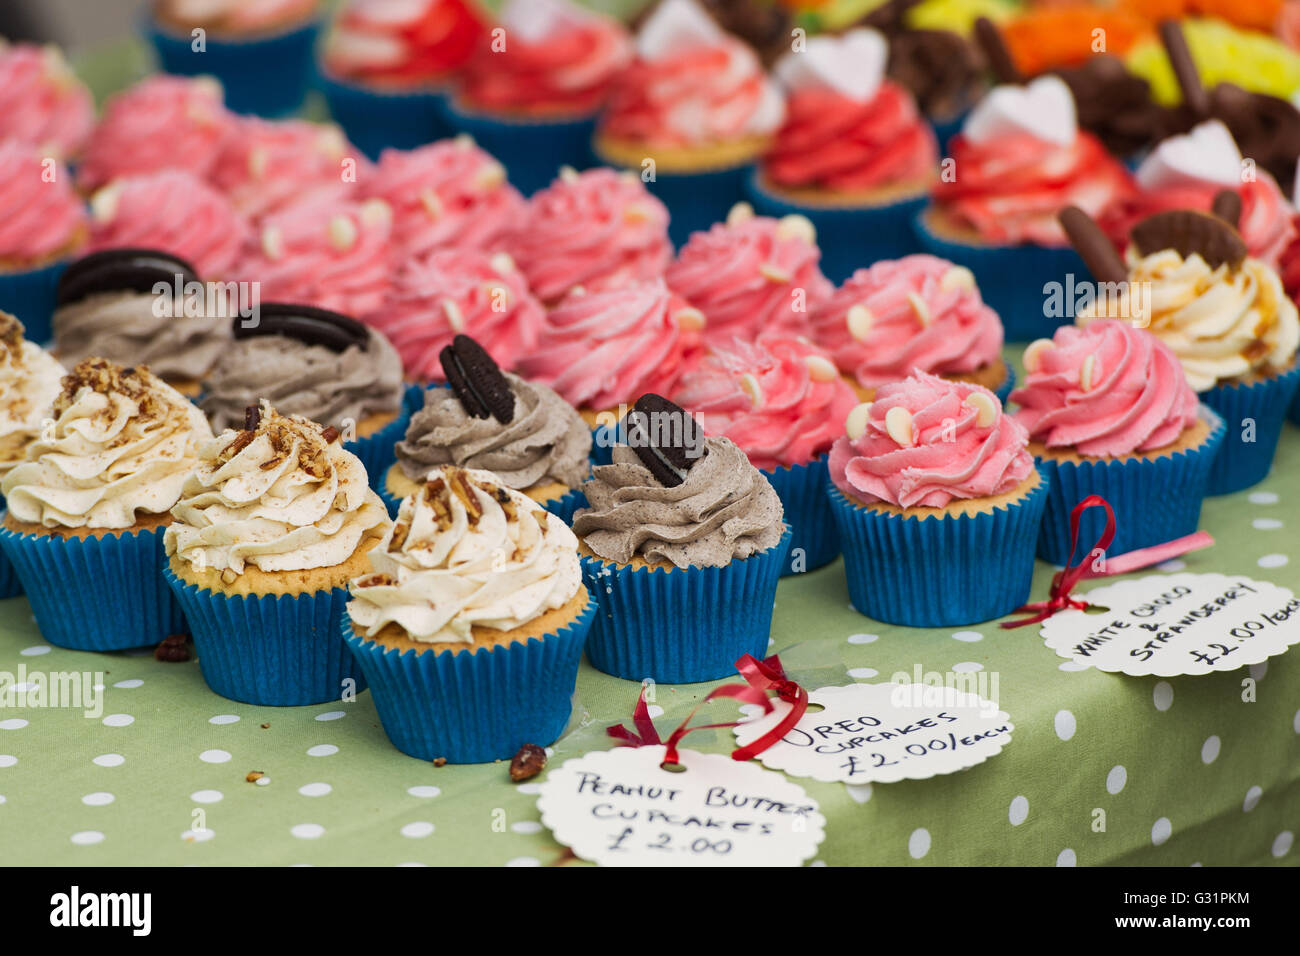 Cupcake for sale at a vintage fayre Stock Photo